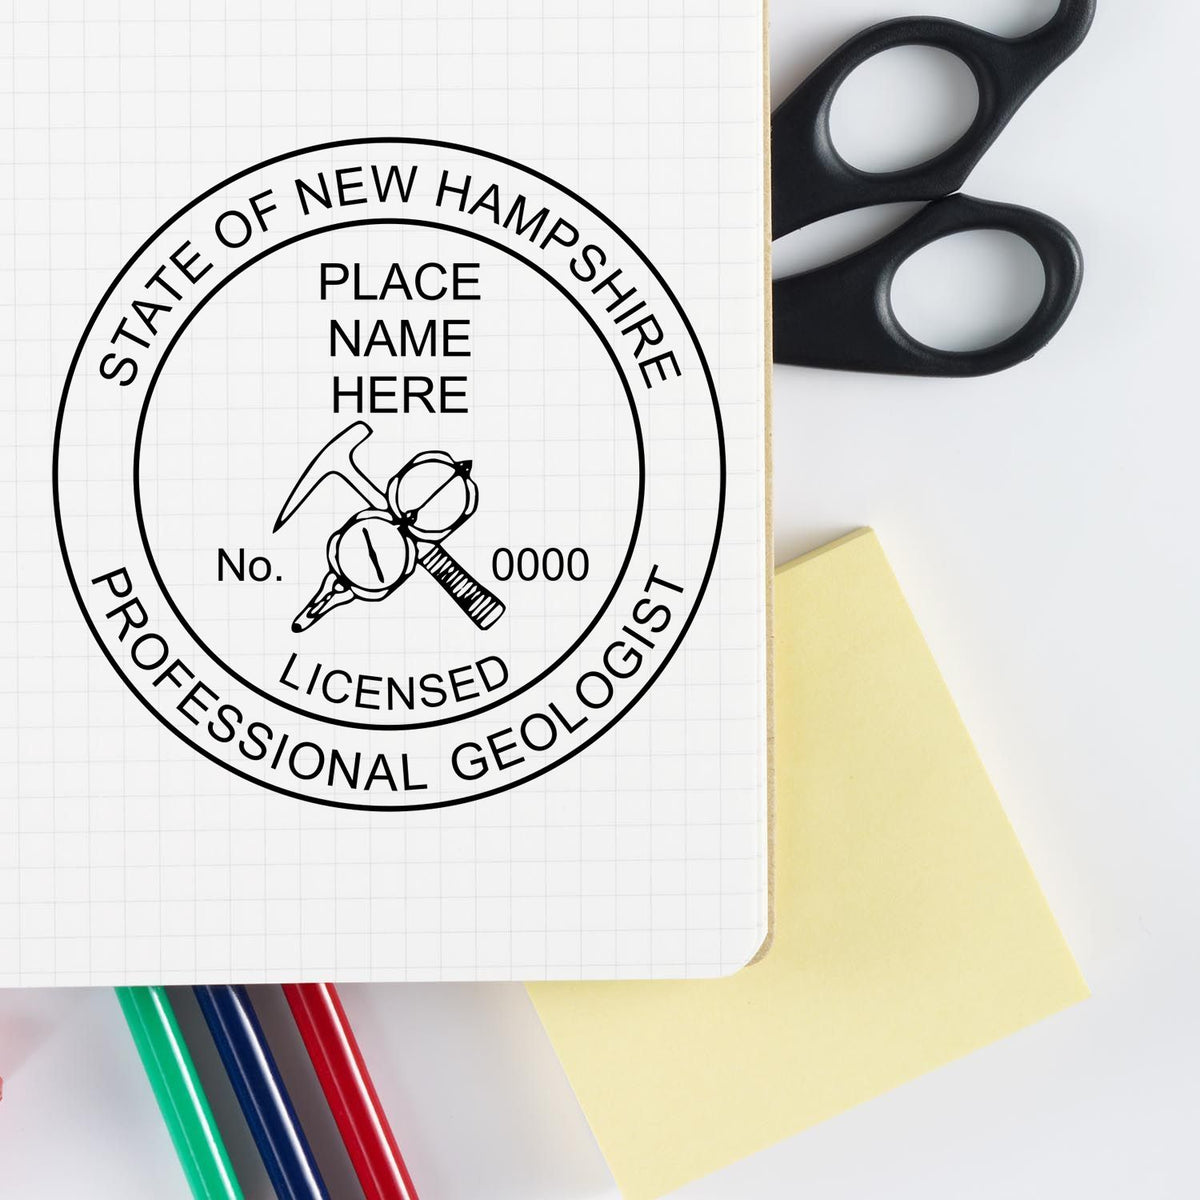 The New Hampshire Professional Geologist Seal Stamp stamp impression comes to life with a crisp, detailed image stamped on paper - showcasing true professional quality.